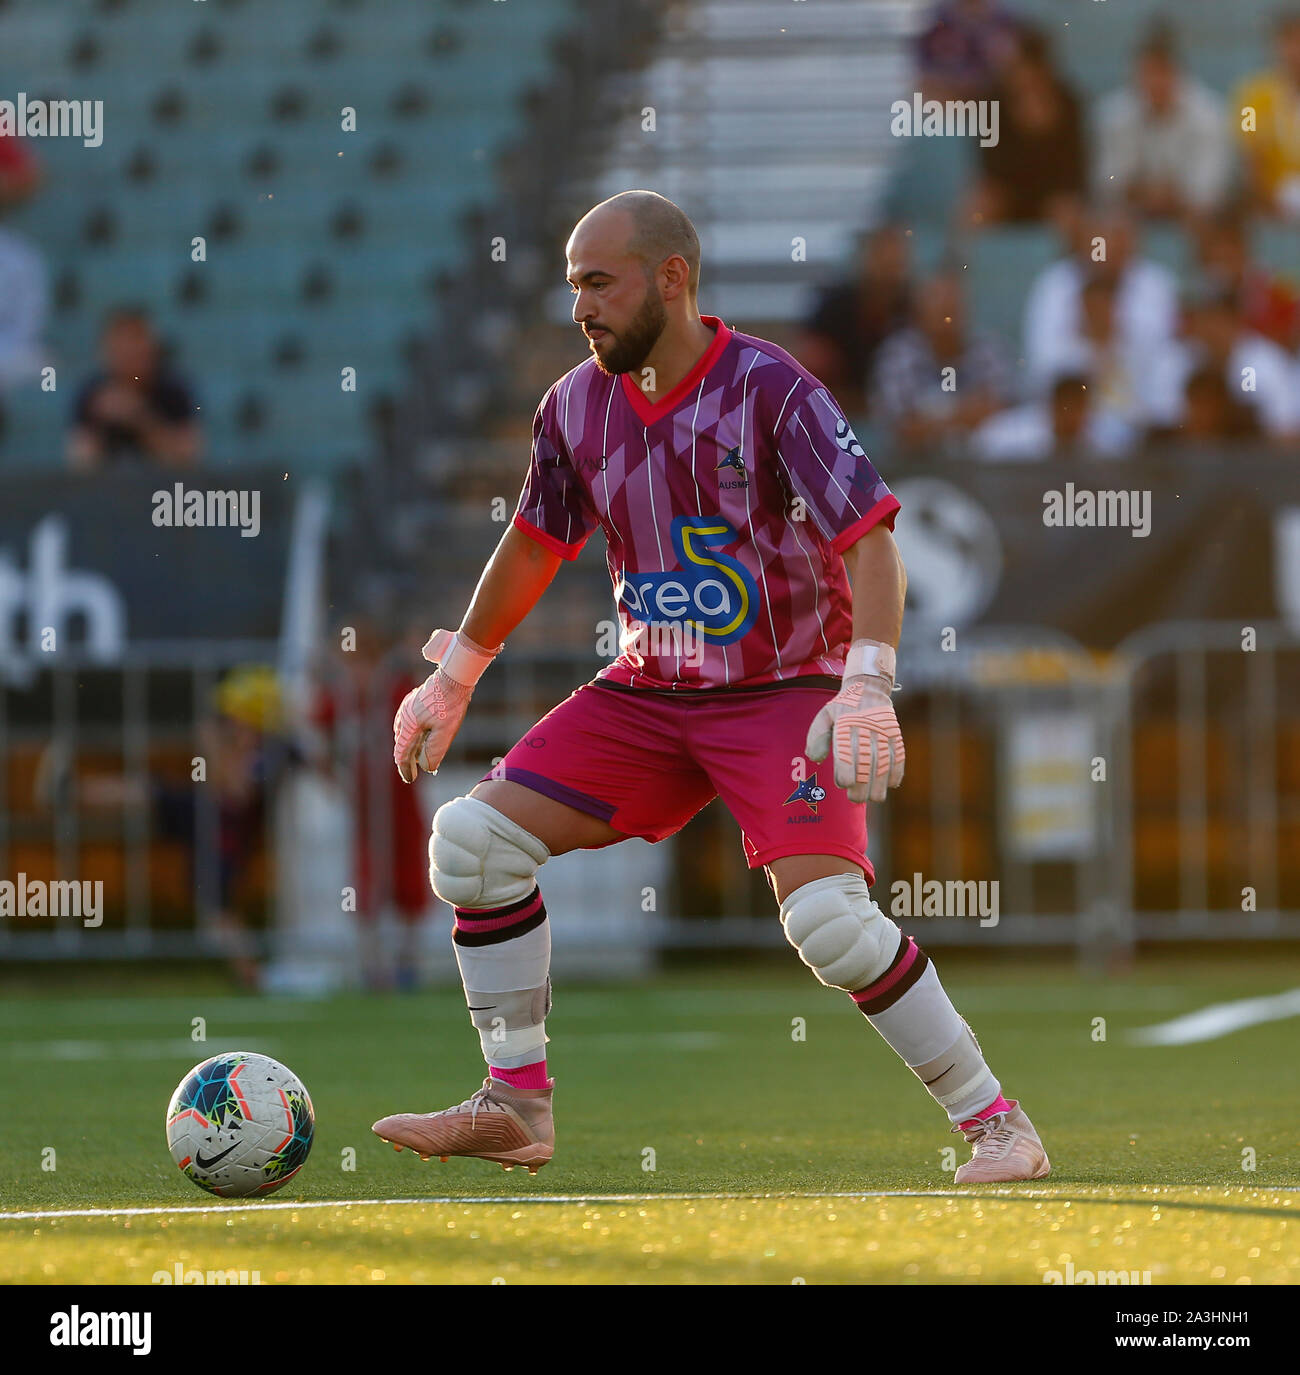 Australian Goalkeeper High Resolution Stock Photography and Images - Alamy